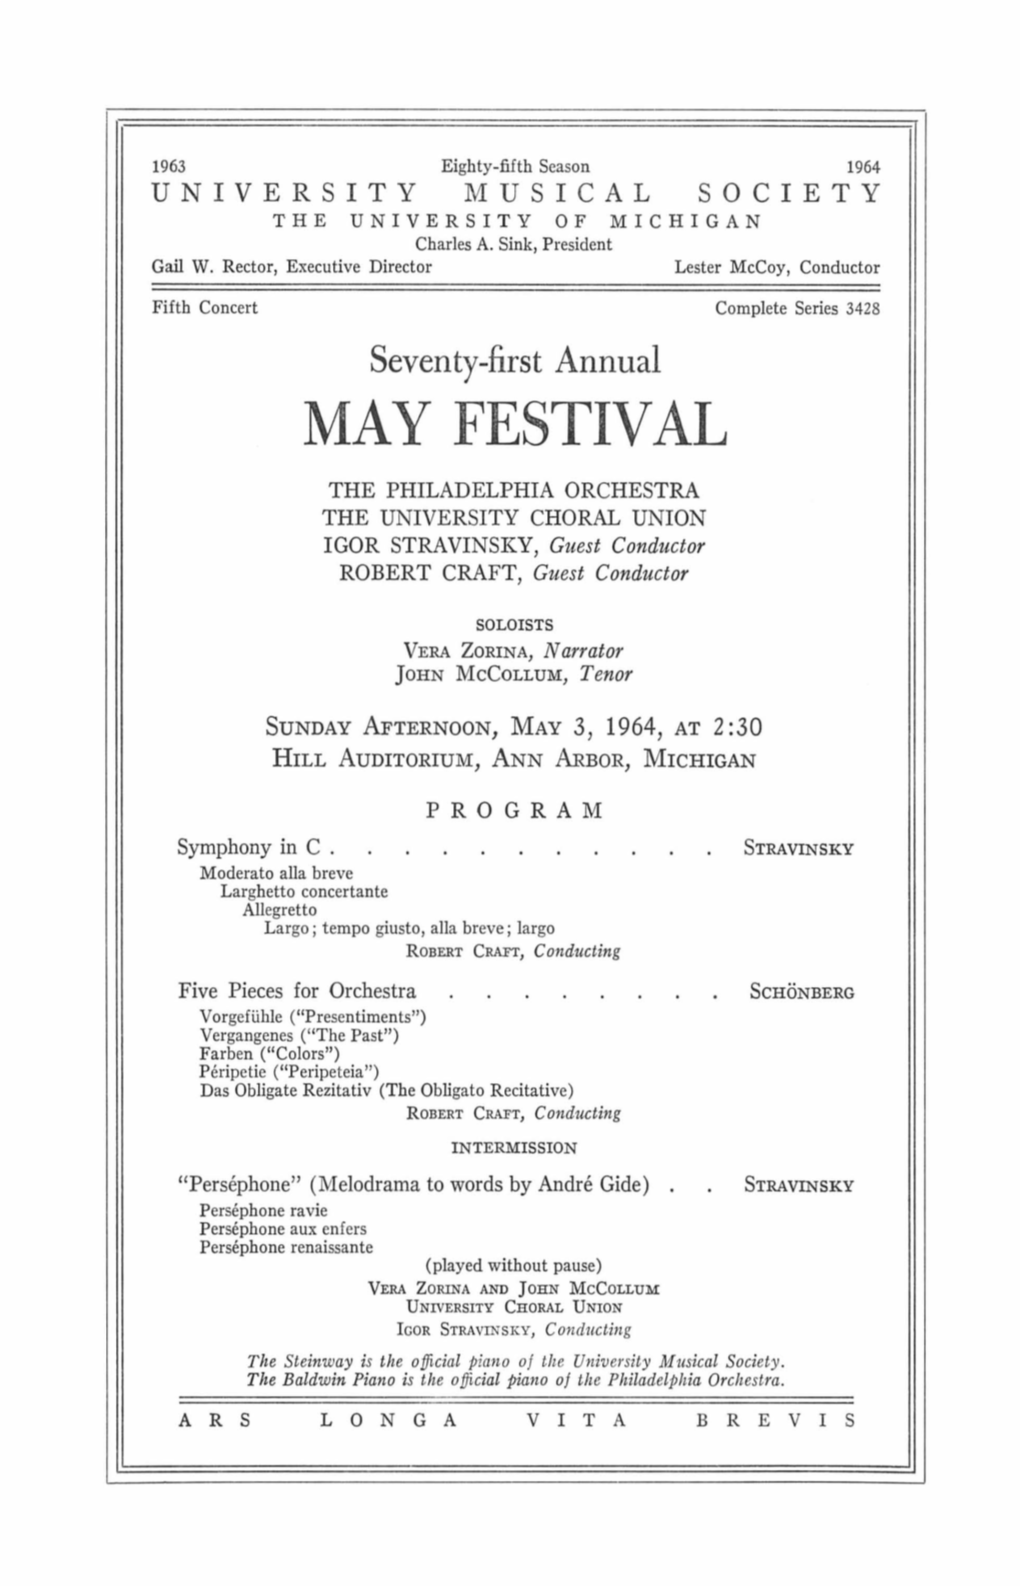 MAY FESTIVAL the PHILADELPHIA ORCHESTRA the UNIVERSITY CHORAL UNION IGOR STRAVINSKY, Guest Conductor ROBERT CRAFT, Guest Conductor